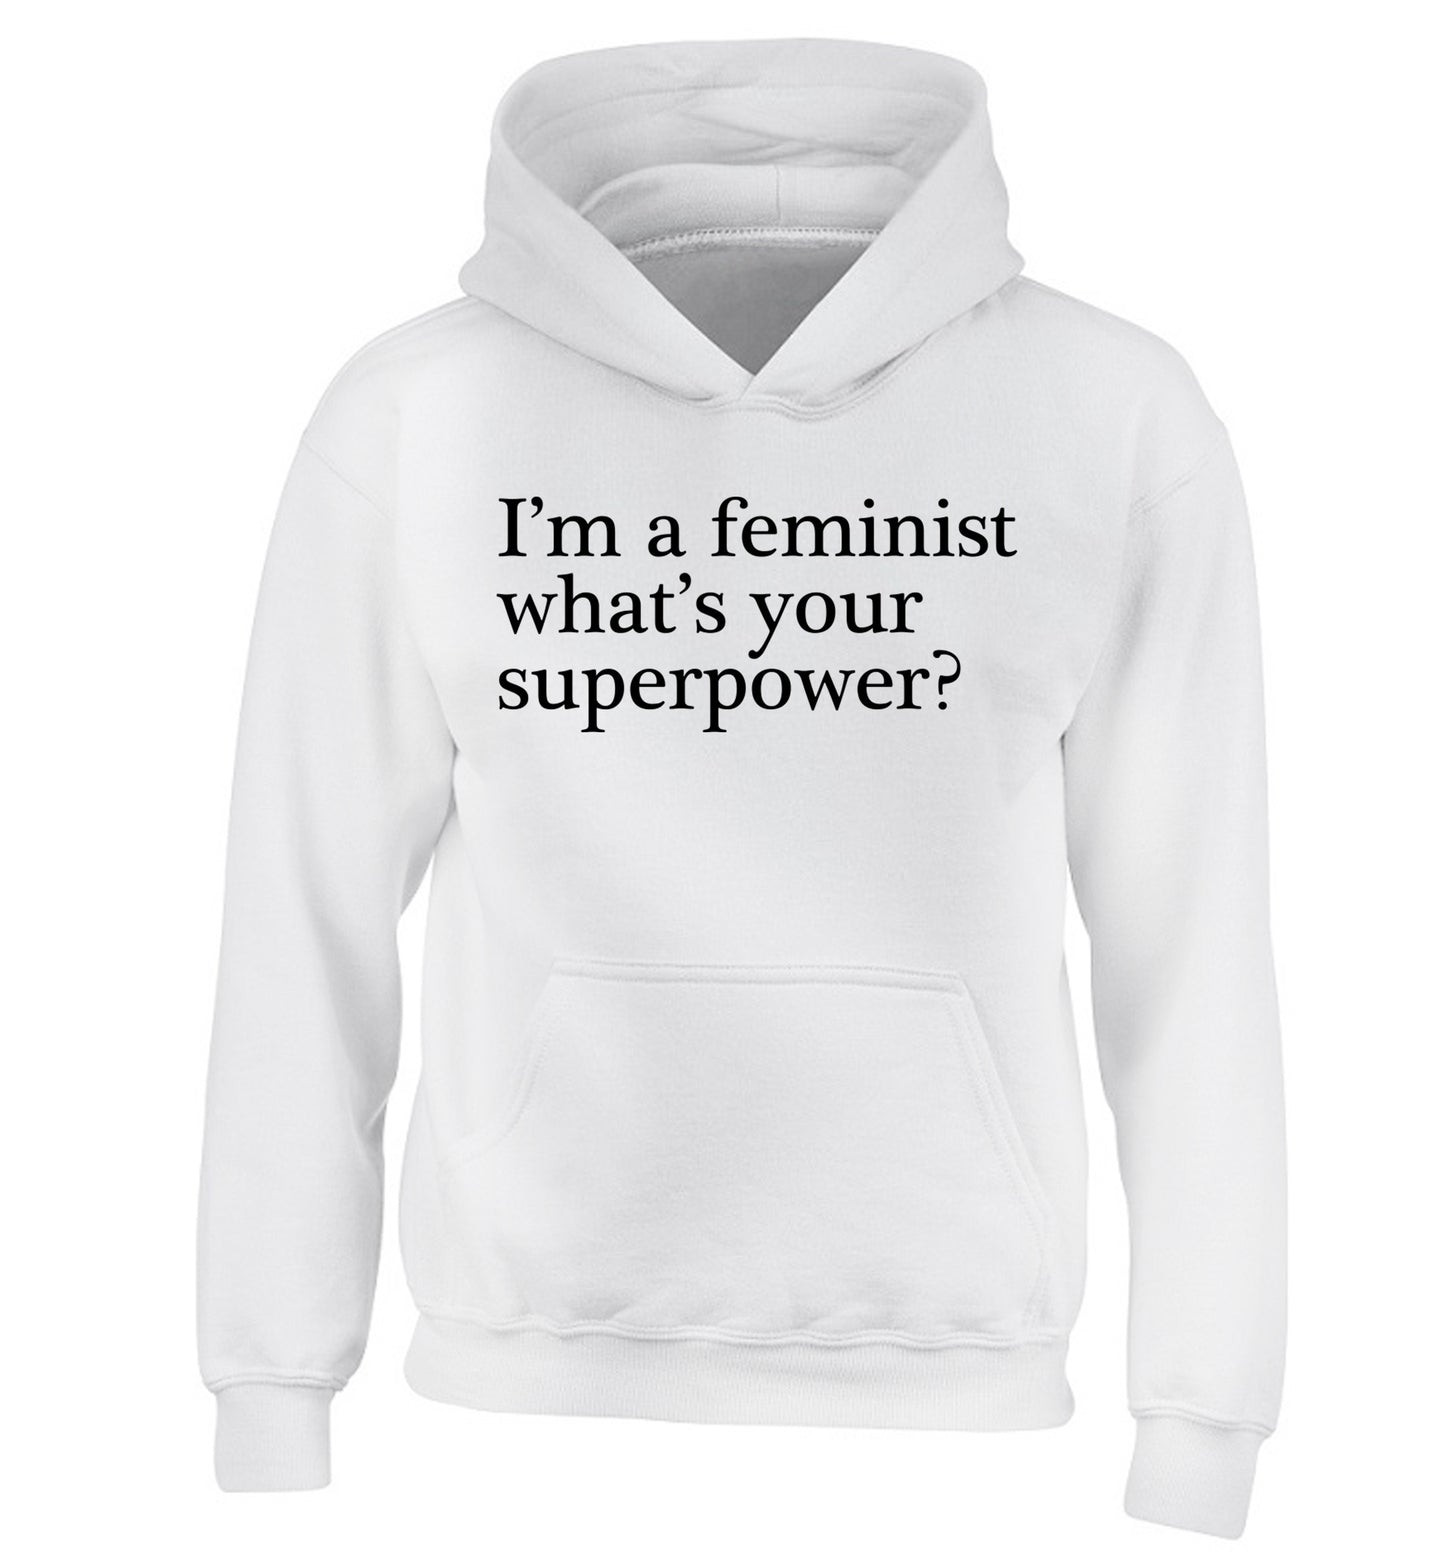 I'm a feminist what's your superpower? children's white hoodie 12-14 Years